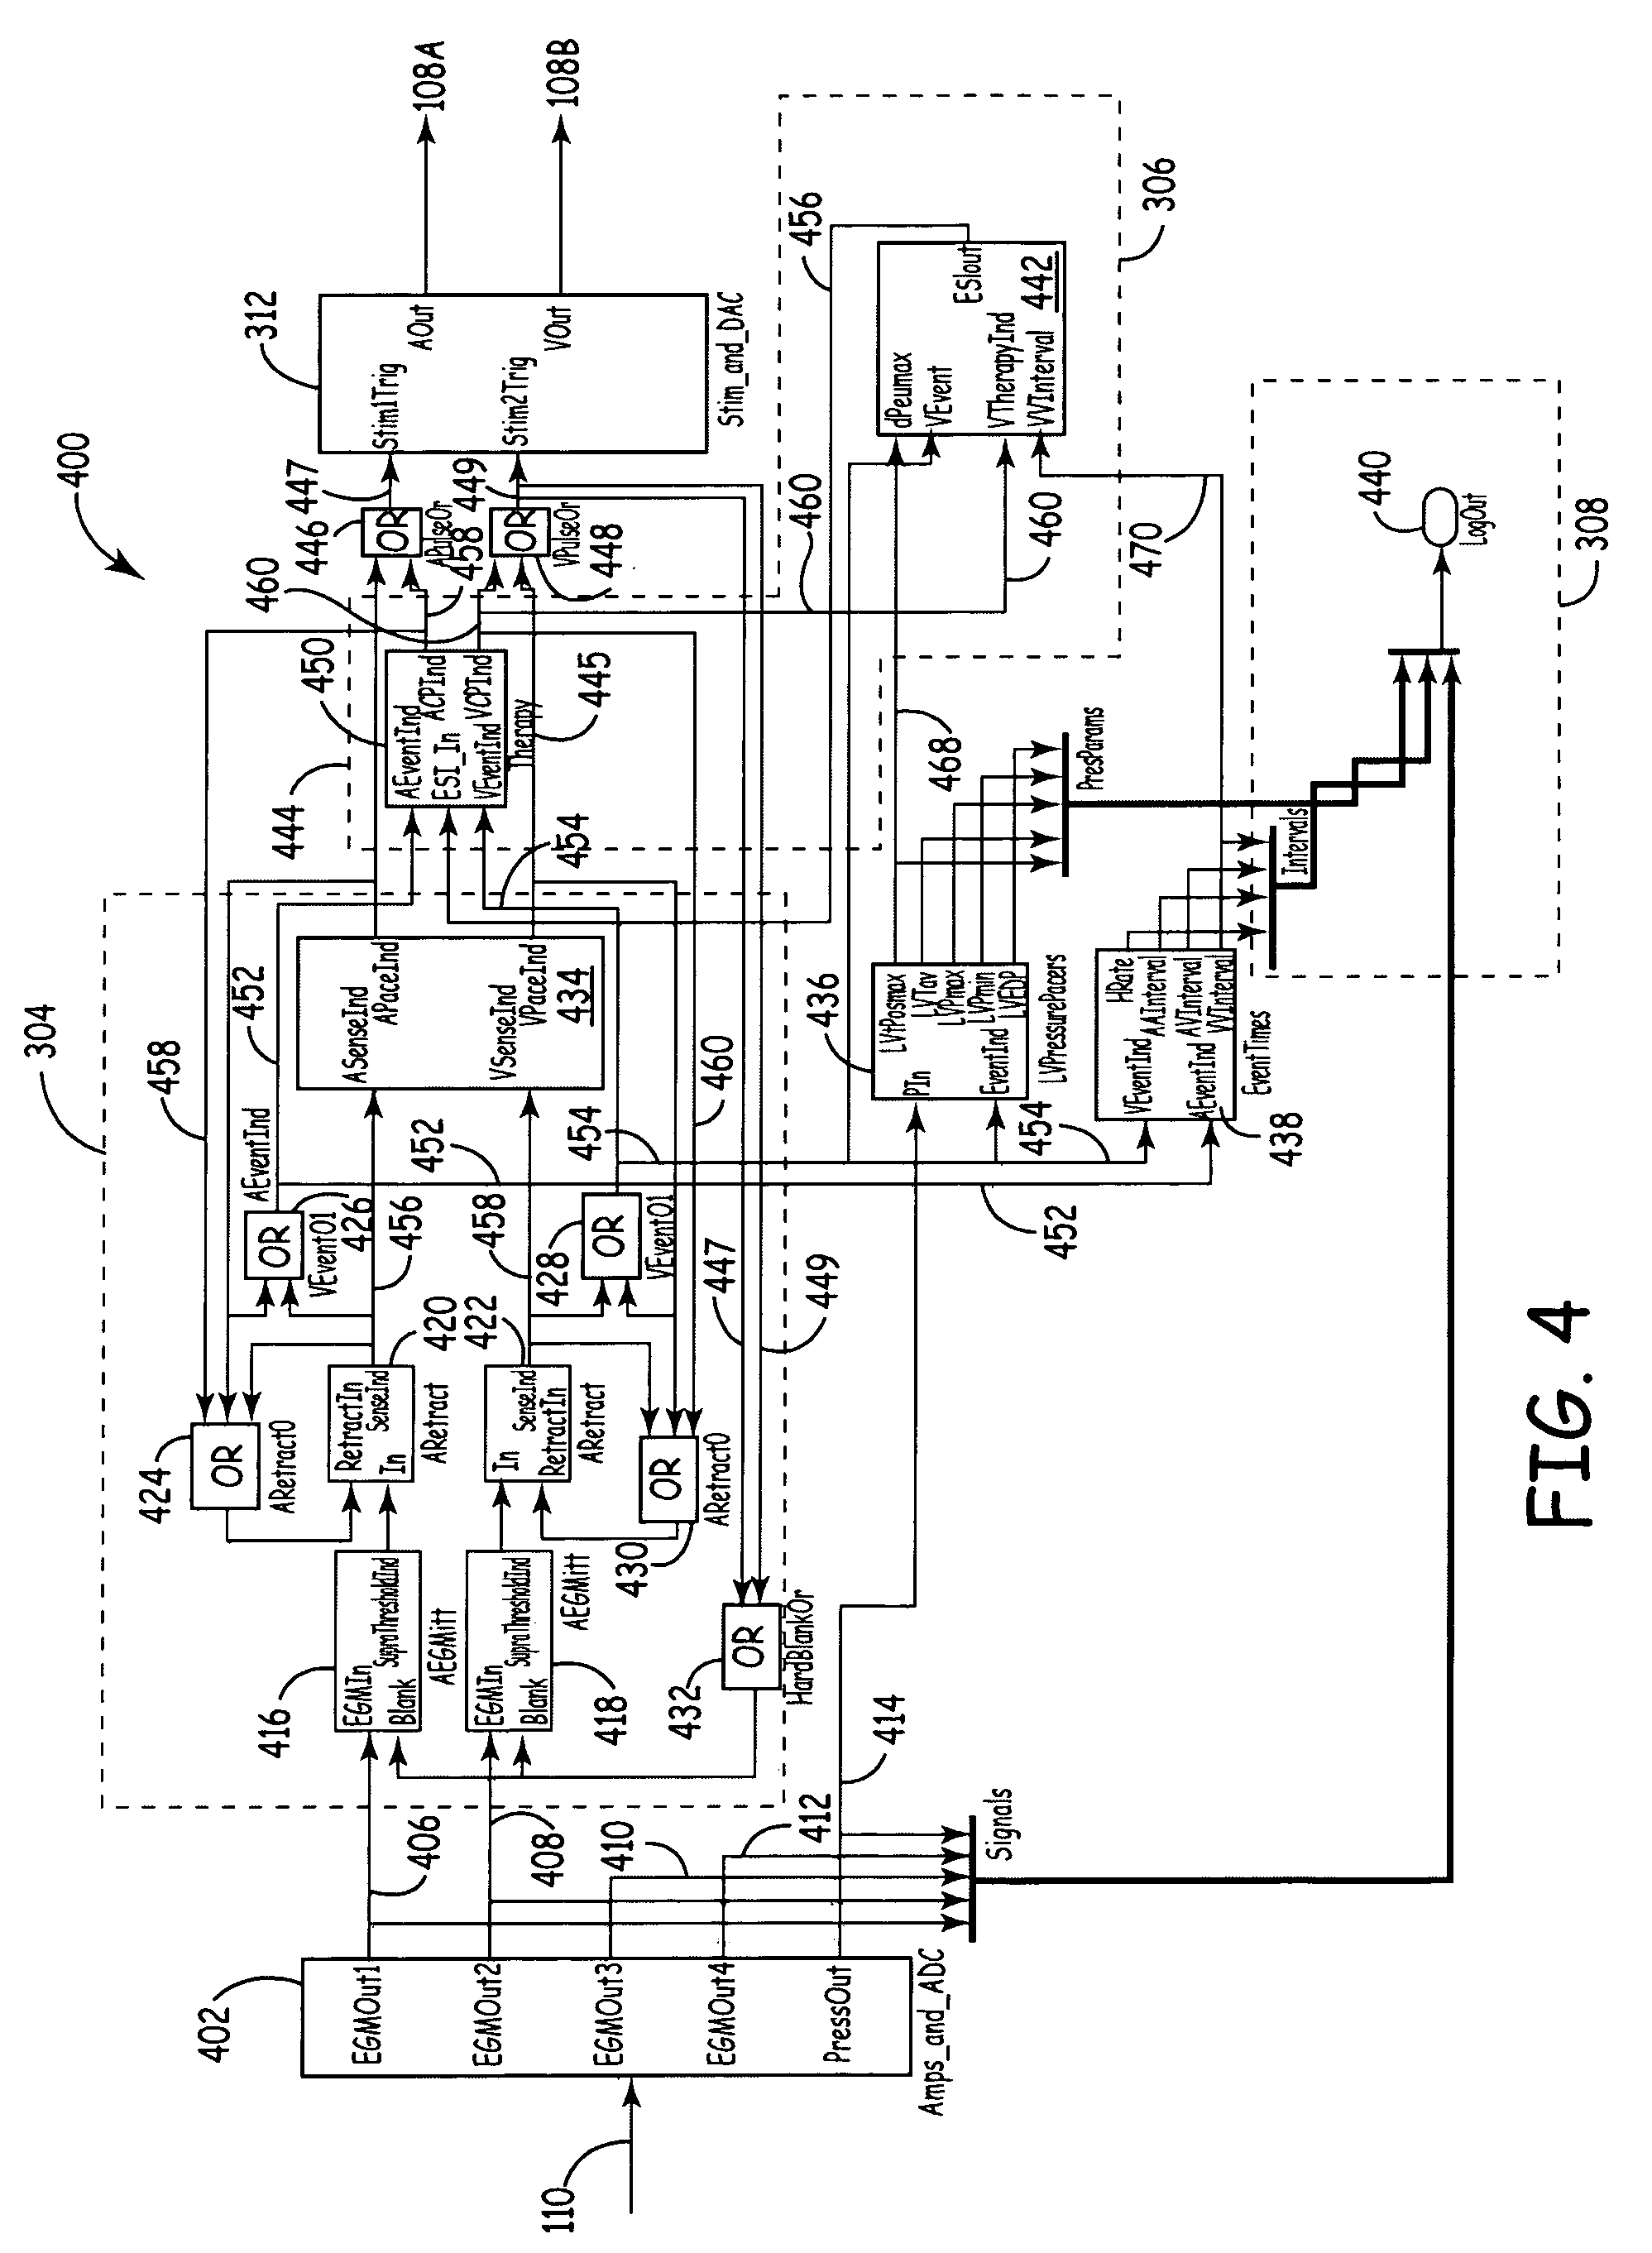 Software configurable medical device platform and associated methods